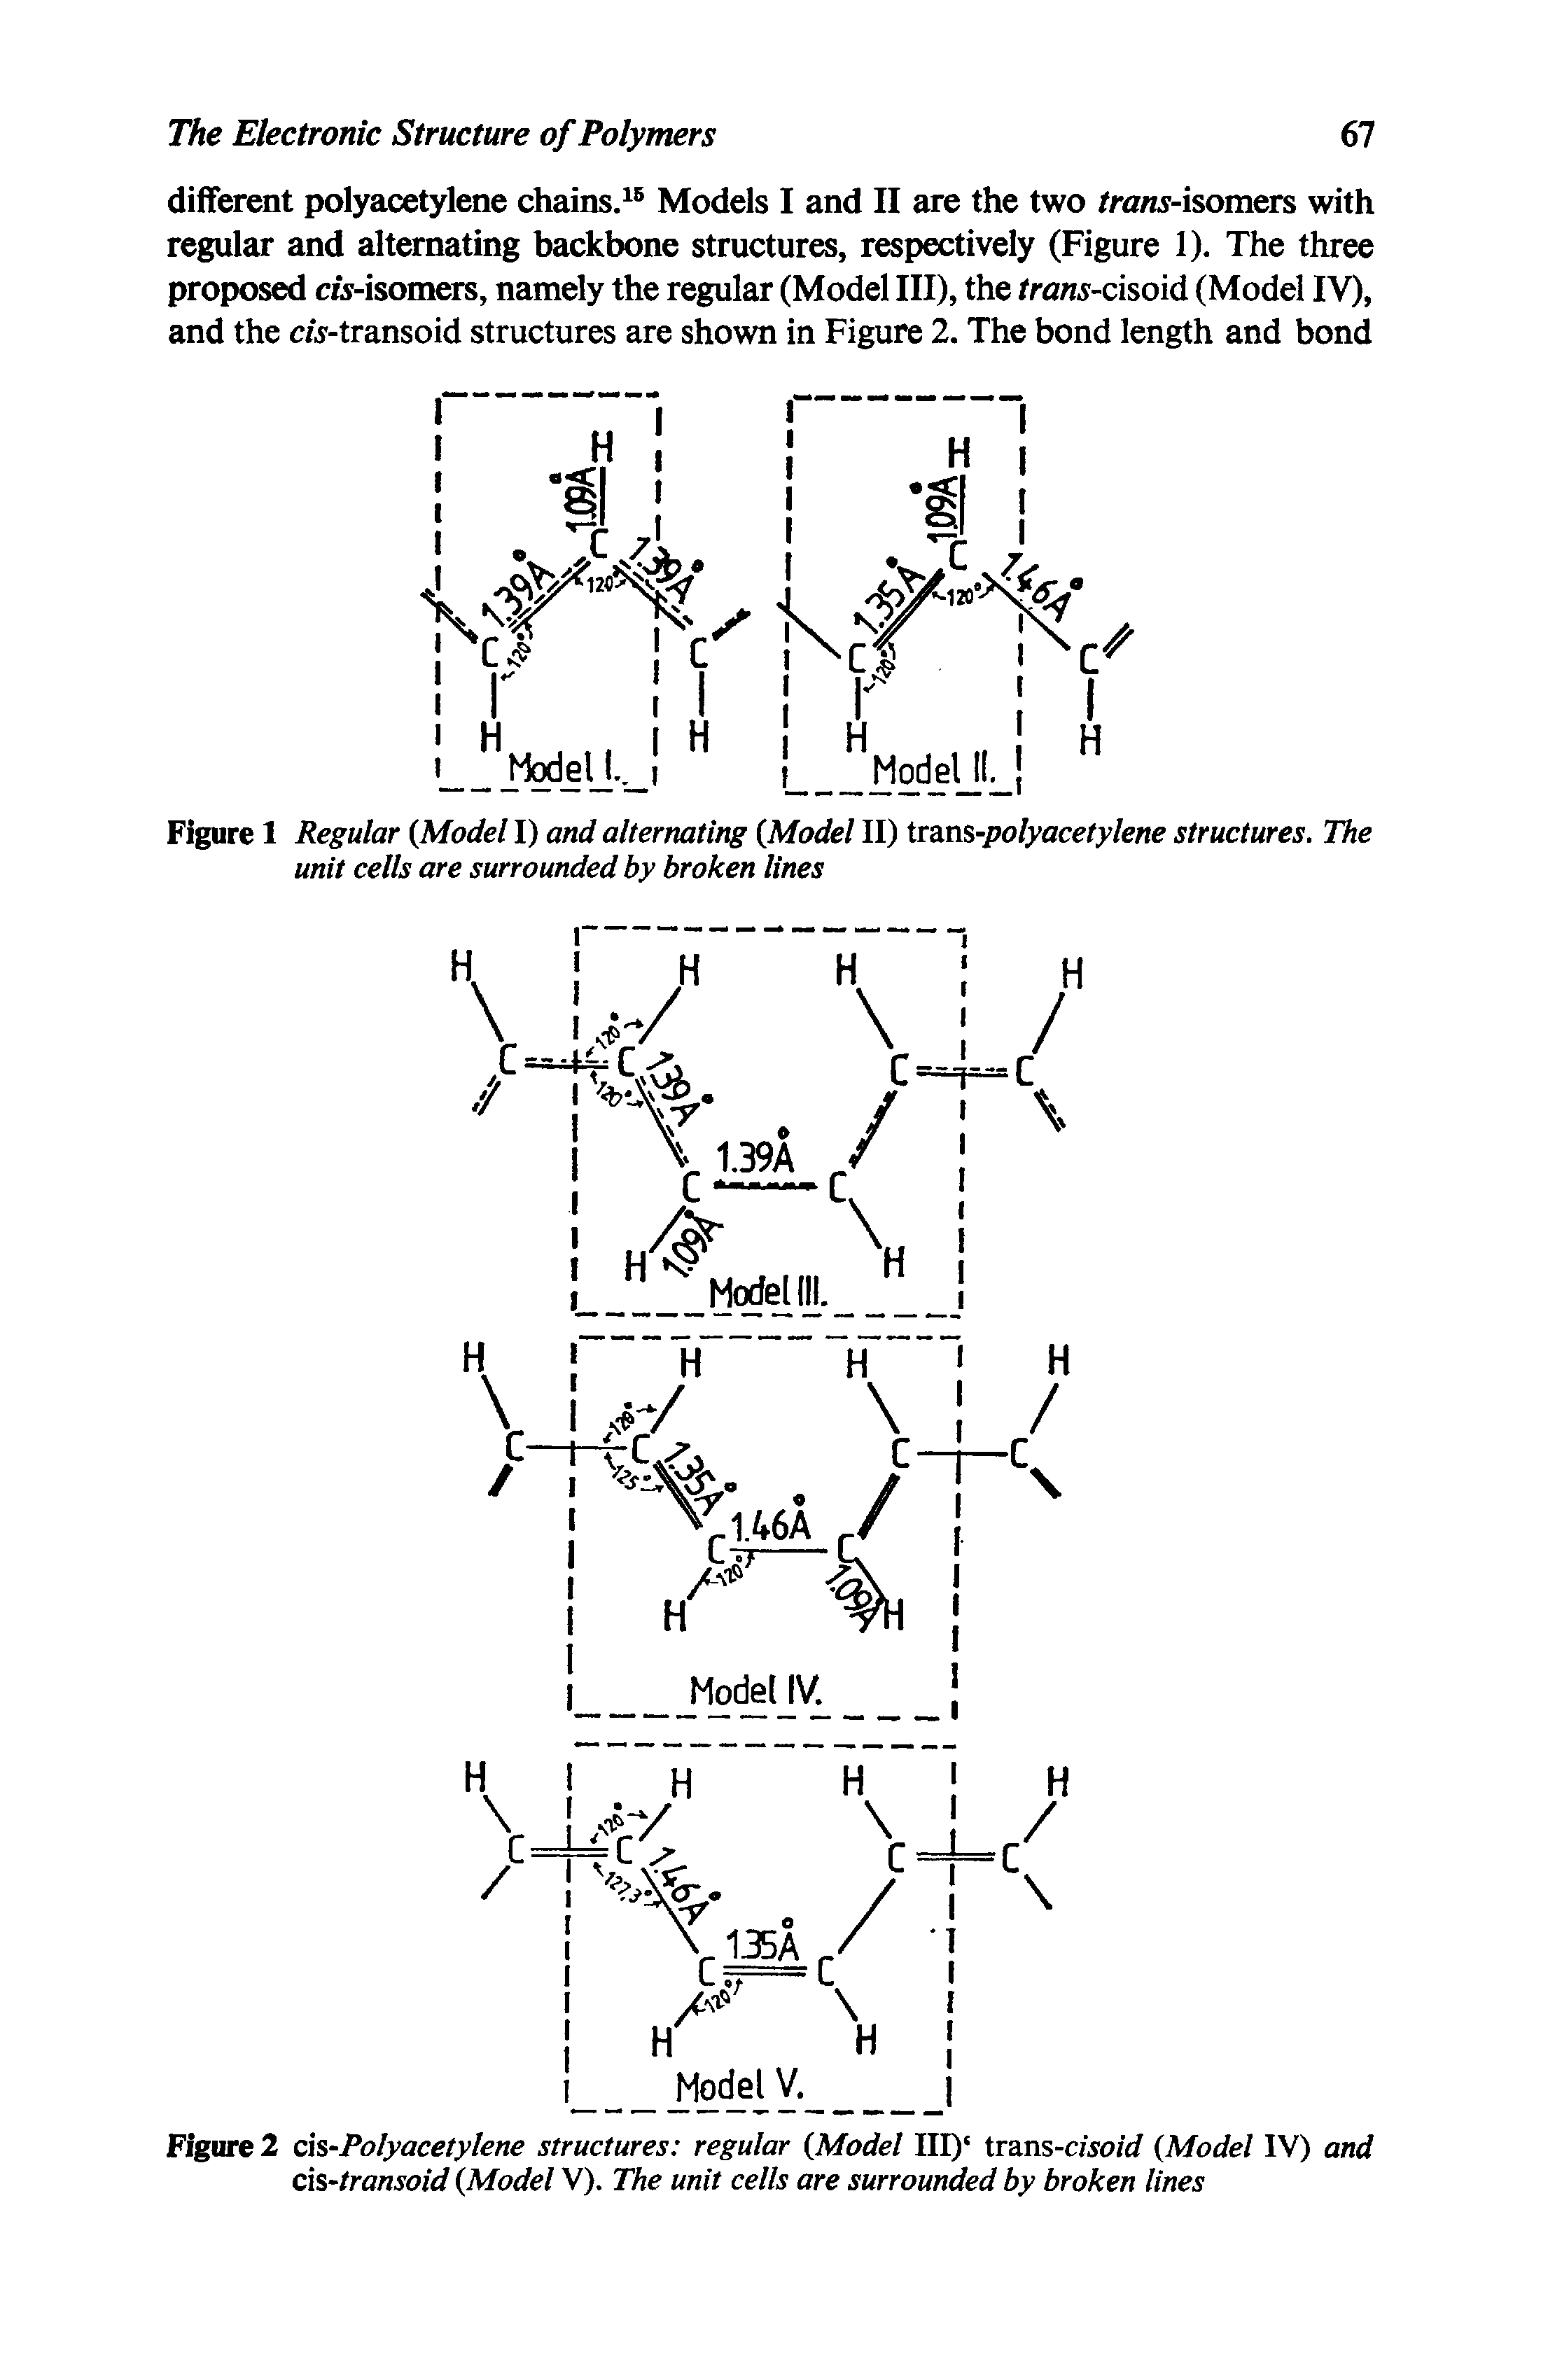 Figure 1 Regular (Model I) and alternating (Model II) trans-polyacetylene structures. The unit cells are surrounded by broken lines...